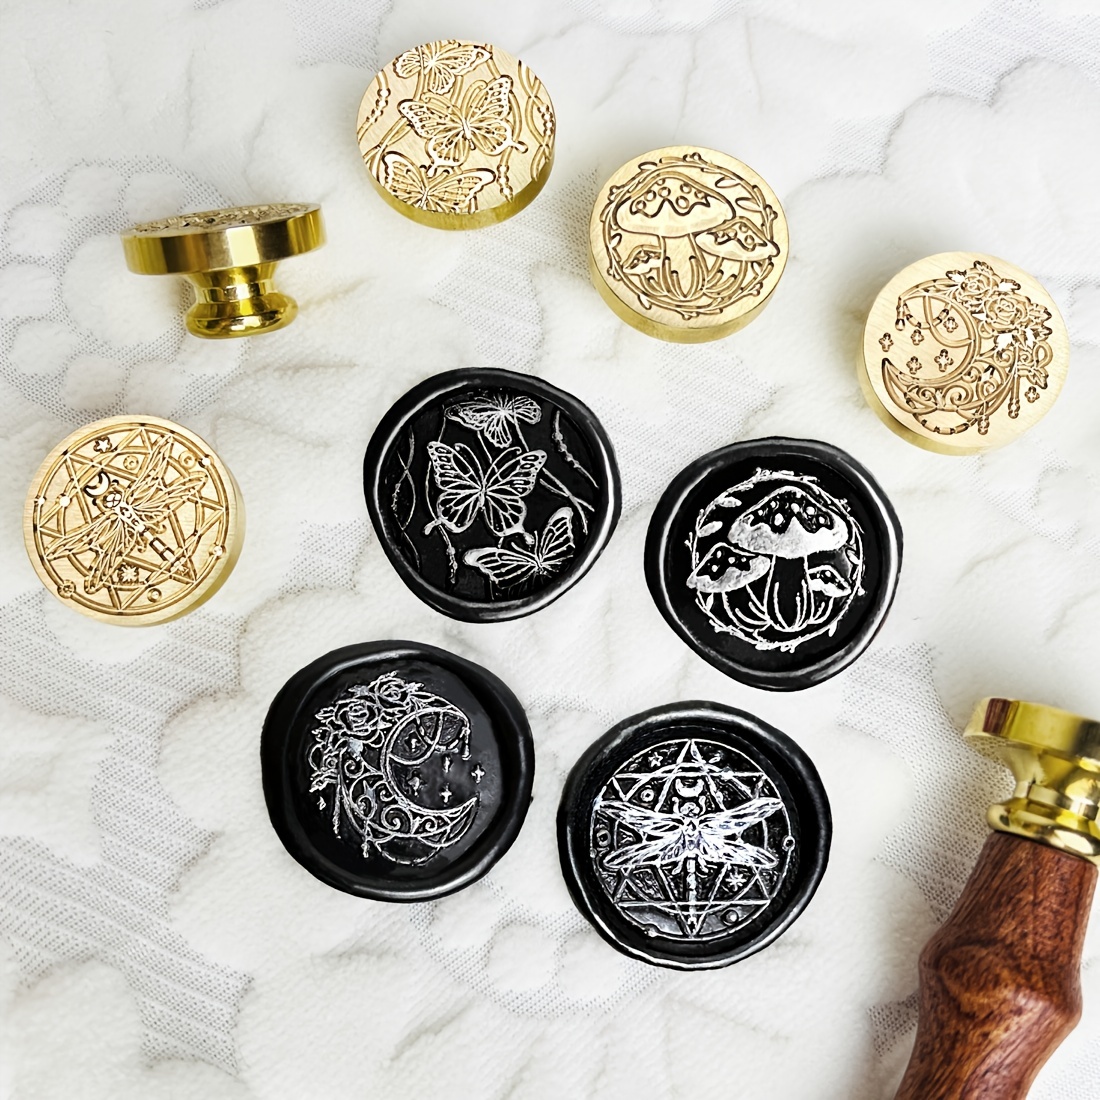 1pc Flower And Sword Wax Seal Stamp Head Replacement Vintage Sealing Wax  Stamp Square Heads Only No Handle For Envelopes